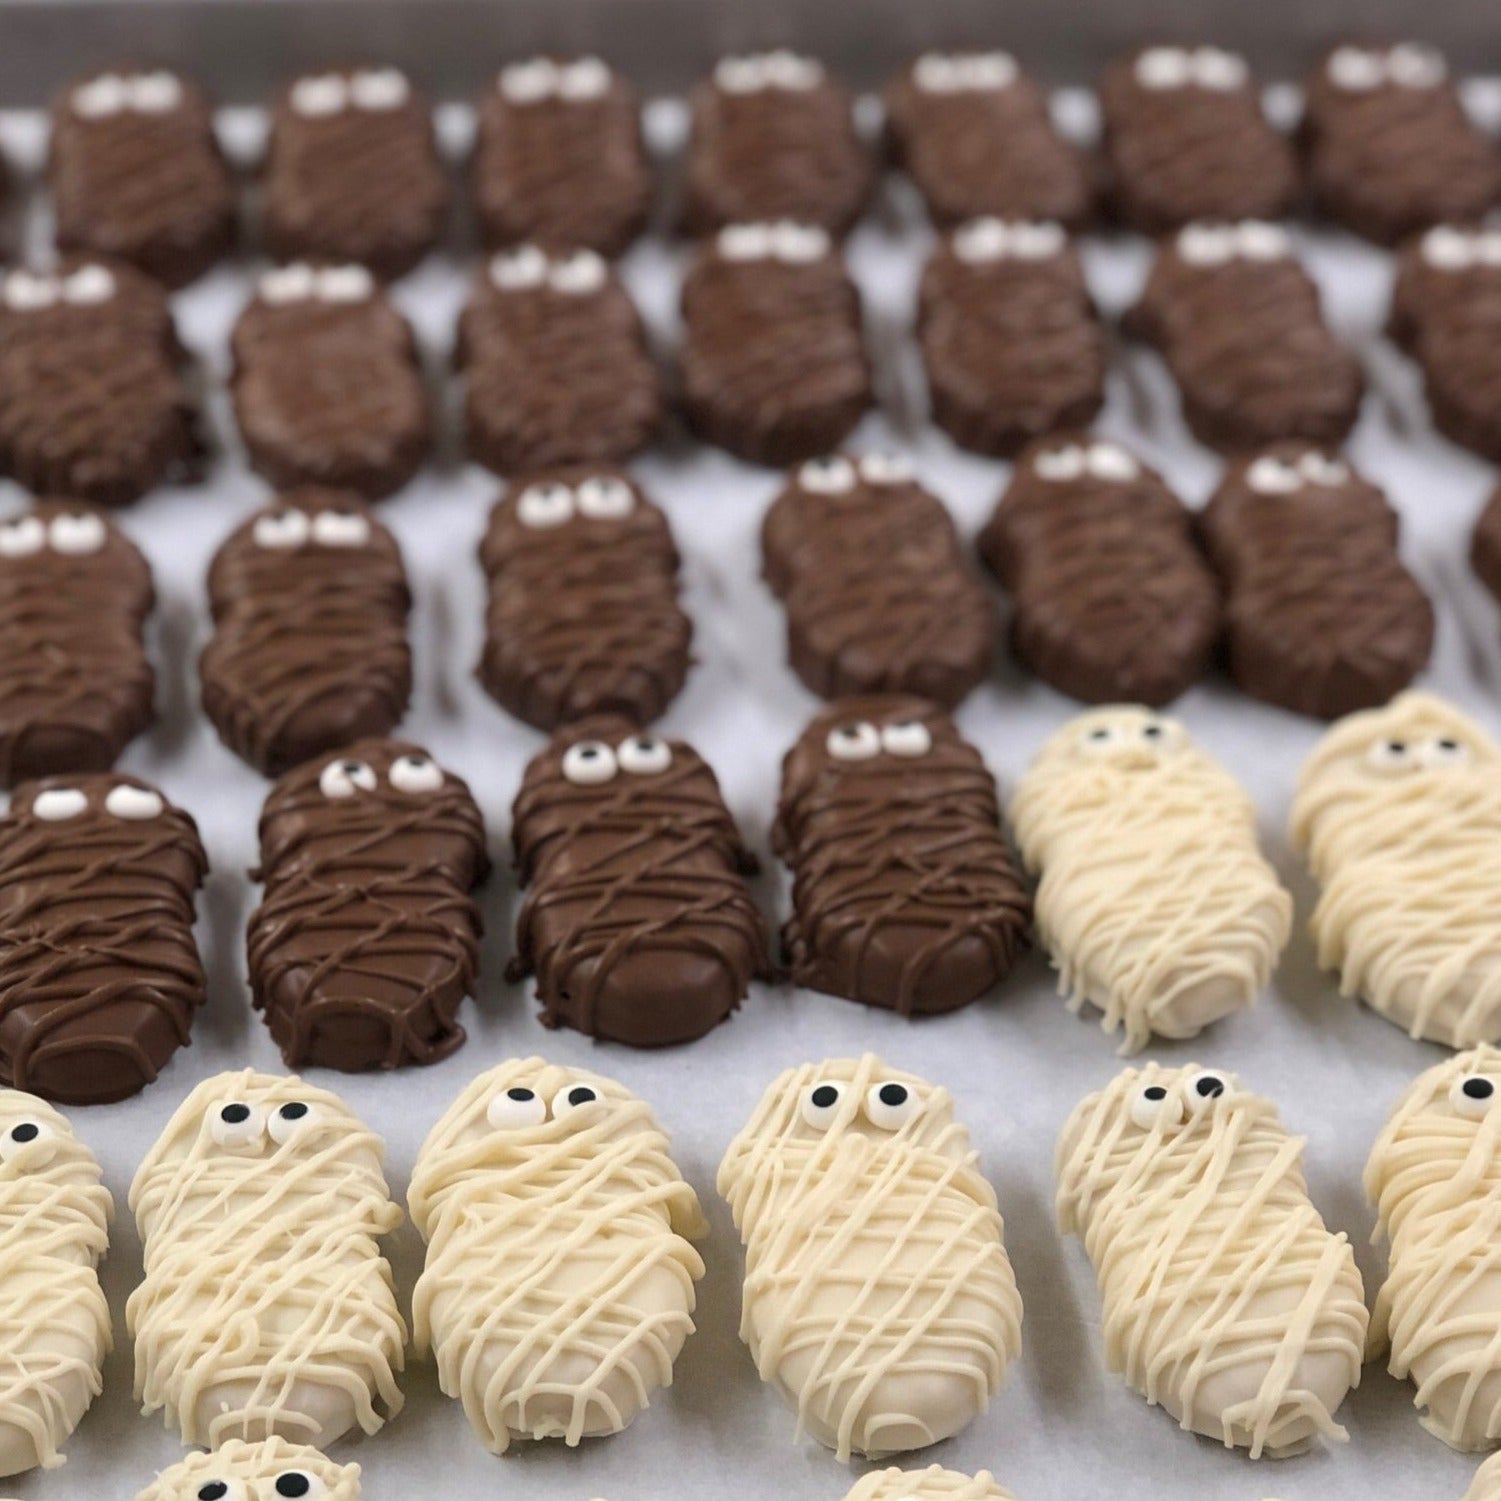 Mummies (peanut butter cookies covered in milk or white chocolate)